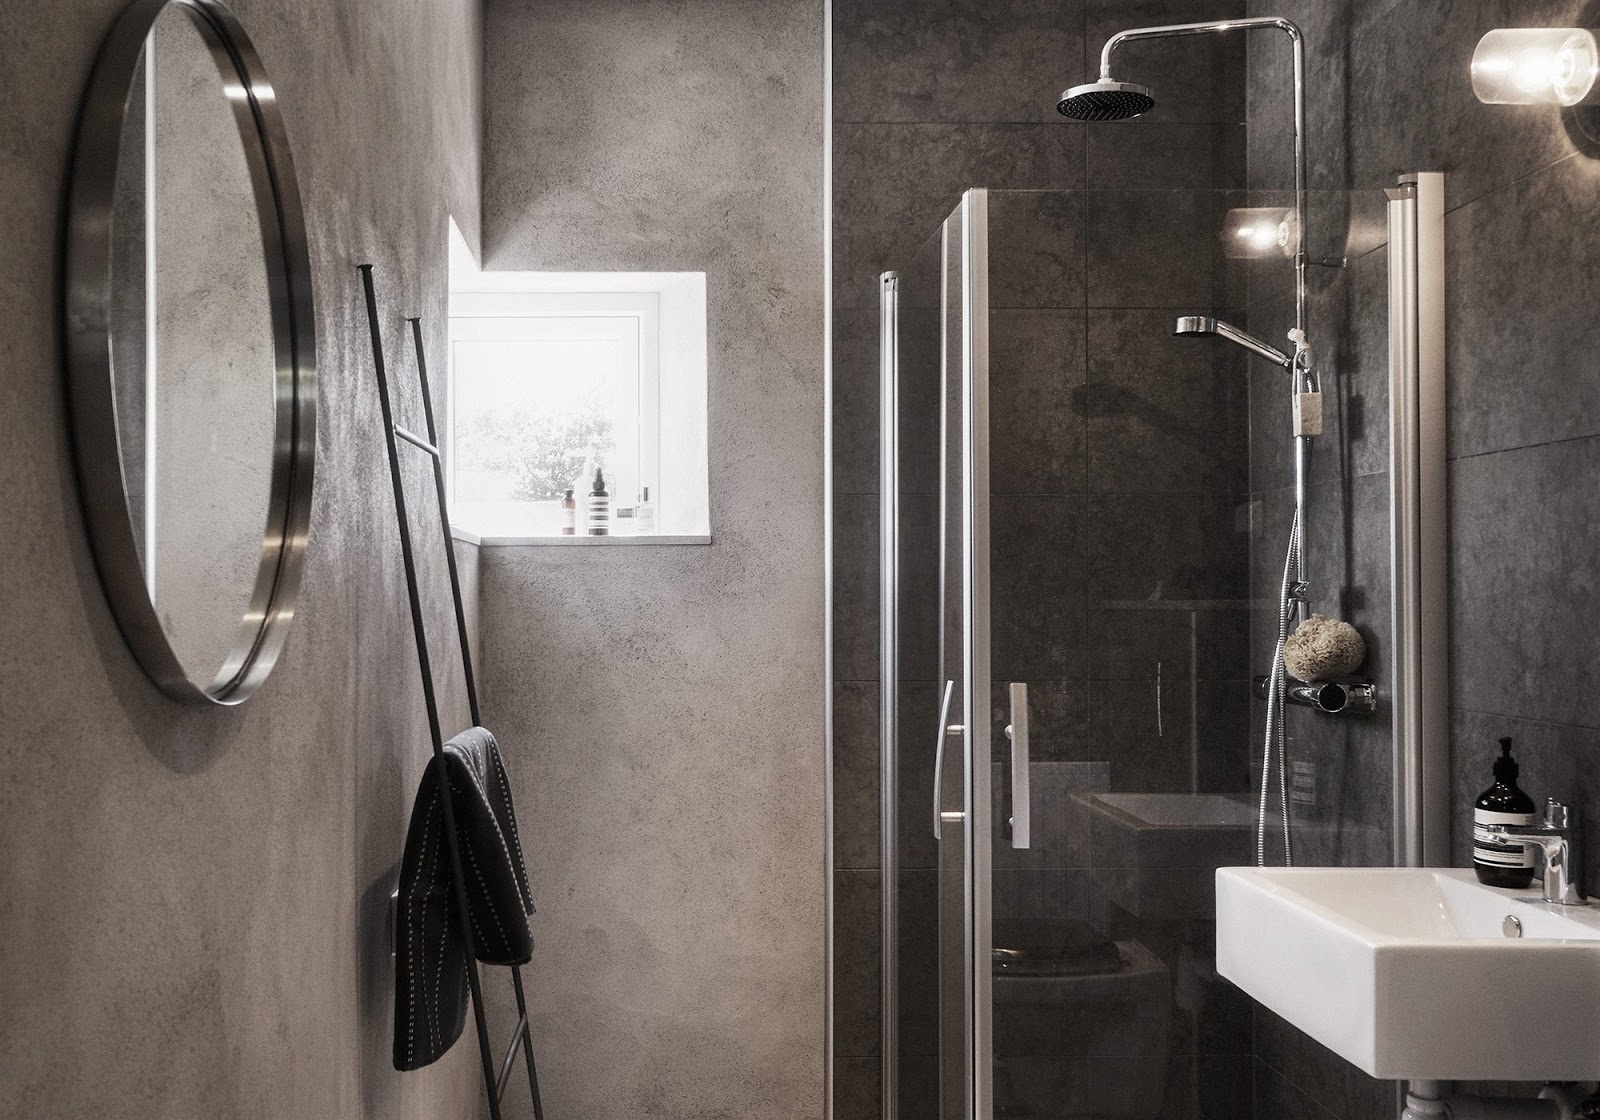 The bathroom is decorated with concrete and dark tiles that remind of concrete too